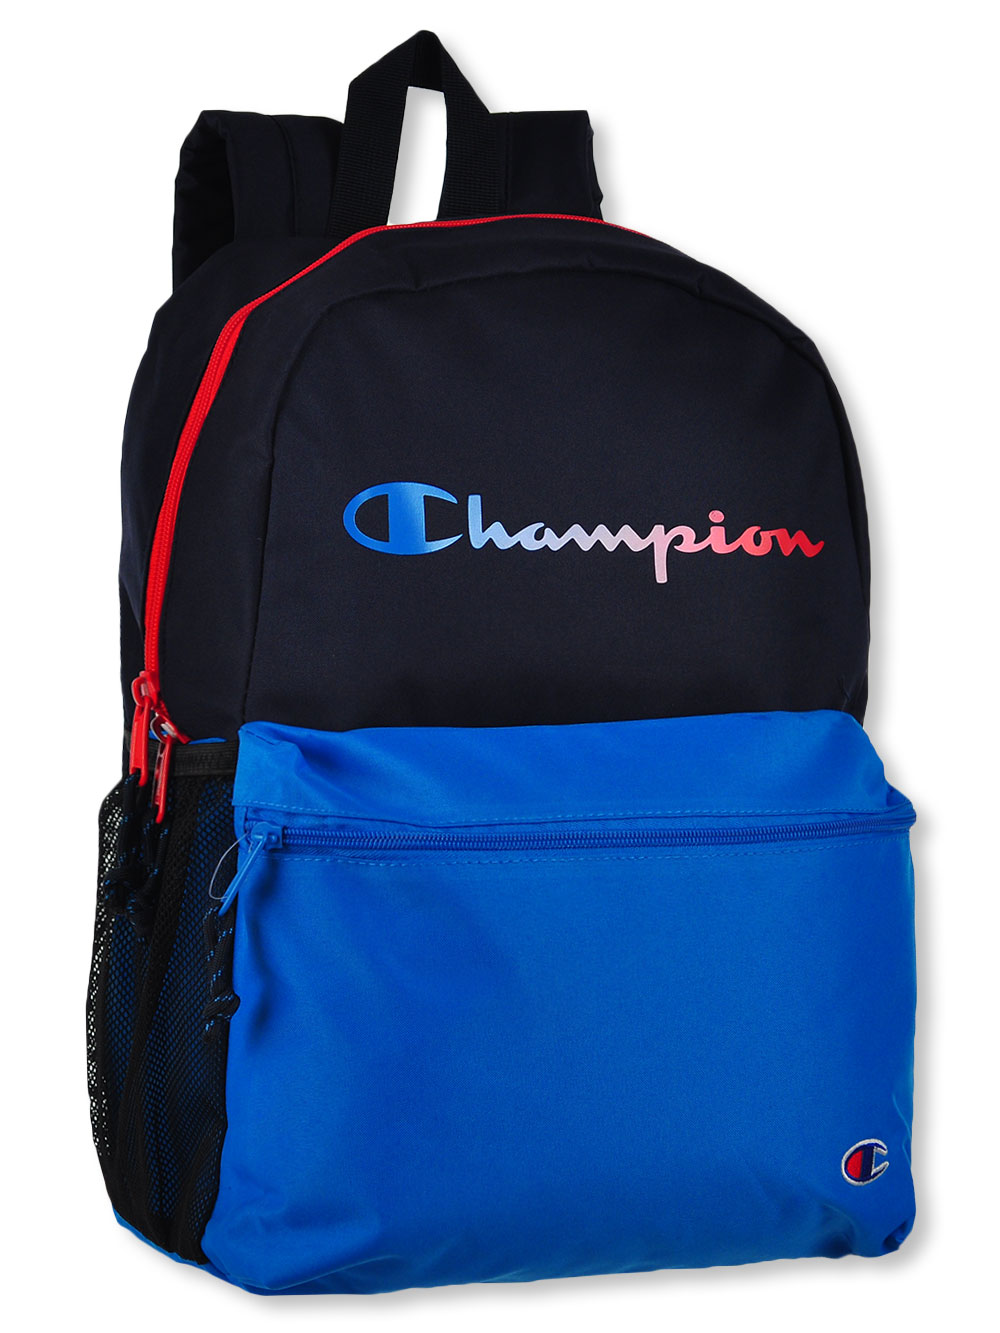 Champion Youthquake Backpack (Assorted Colors) - 77Sales.com